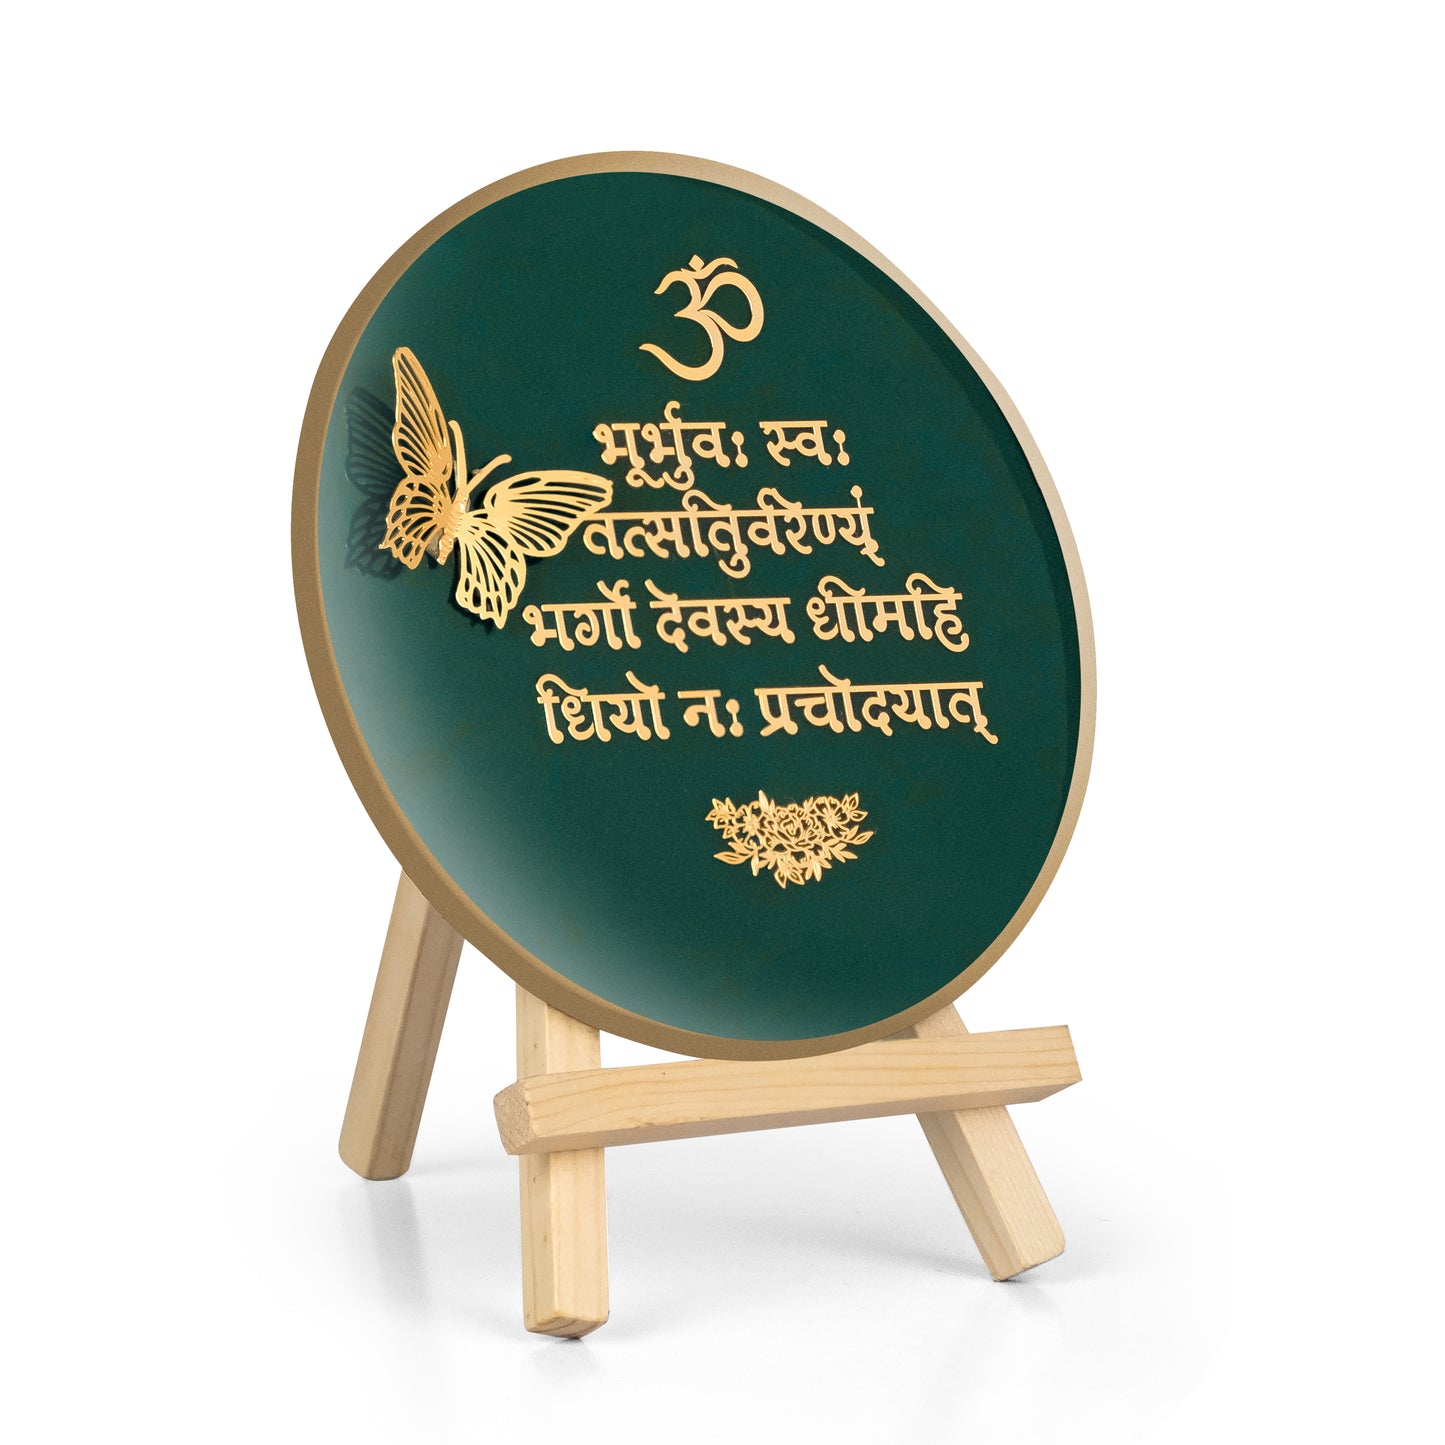 Gayatri Mantra Resin Art gold cutwork with A Type Pine Wood Easel Stand - Gifting, Decor Art for Home, Office, Yoga Studio